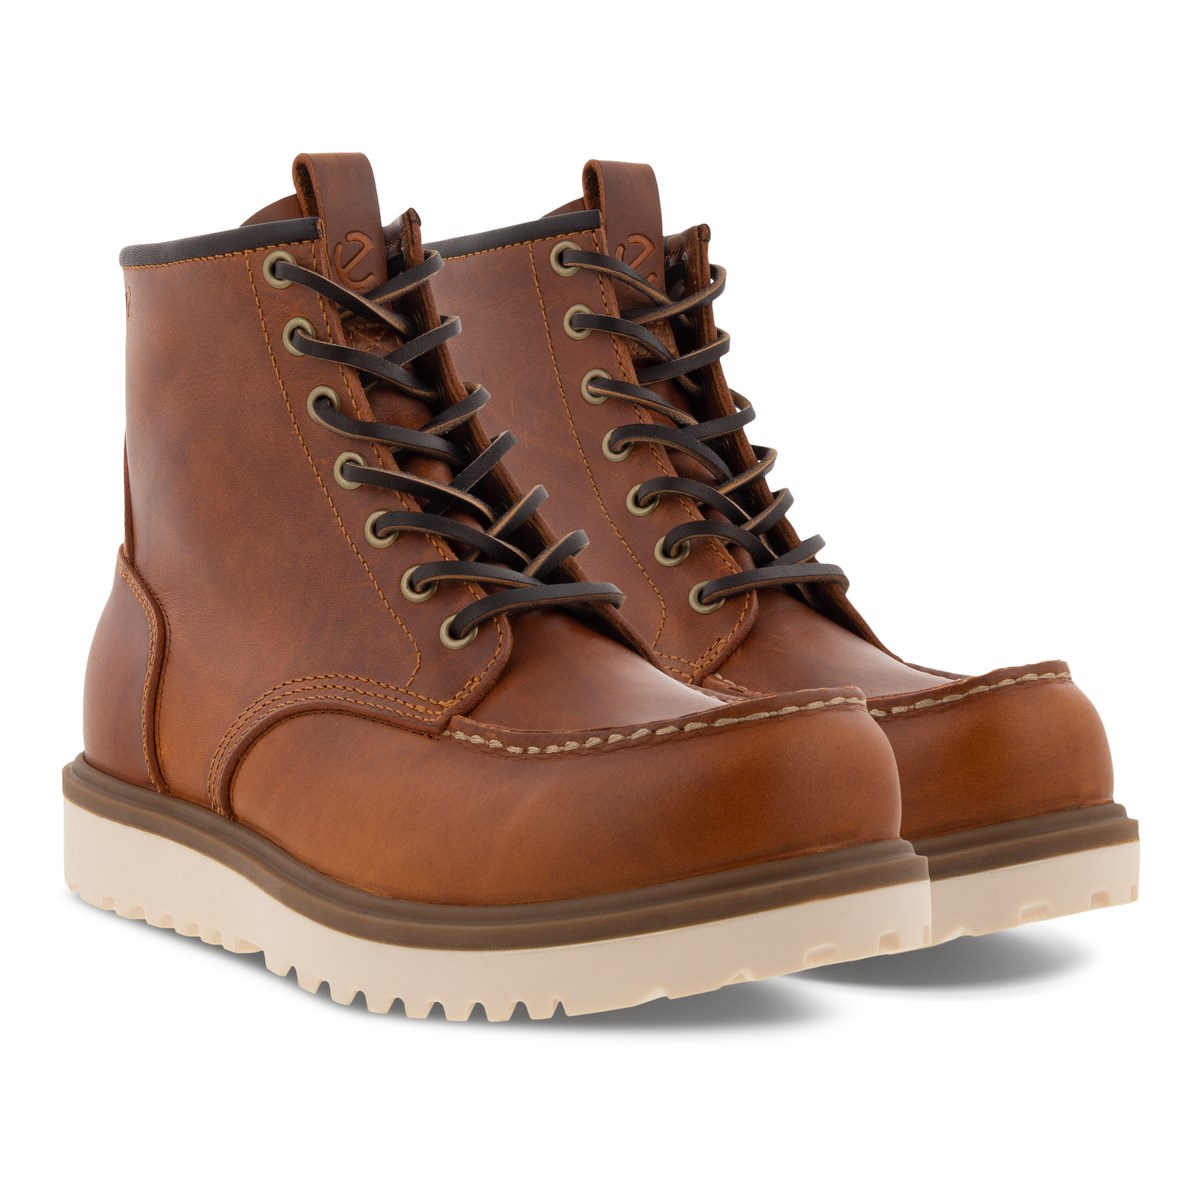 Boots STAKER M - ECCO Shoes